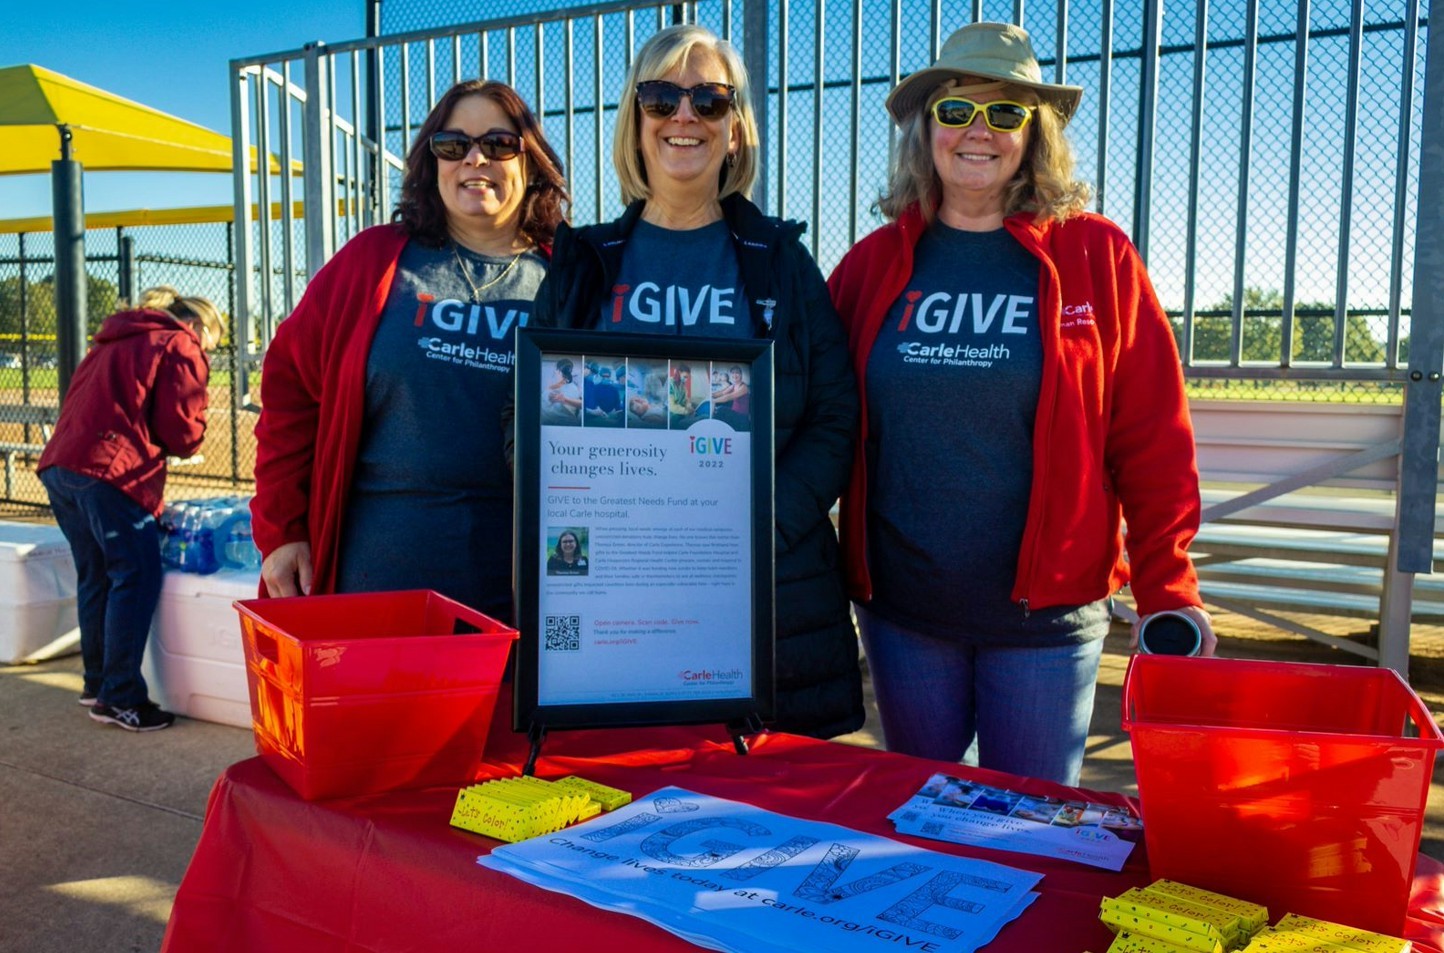 iGIVE is Philanthropy’s annual internal fundraising campaign that rallies team members around one common goal.